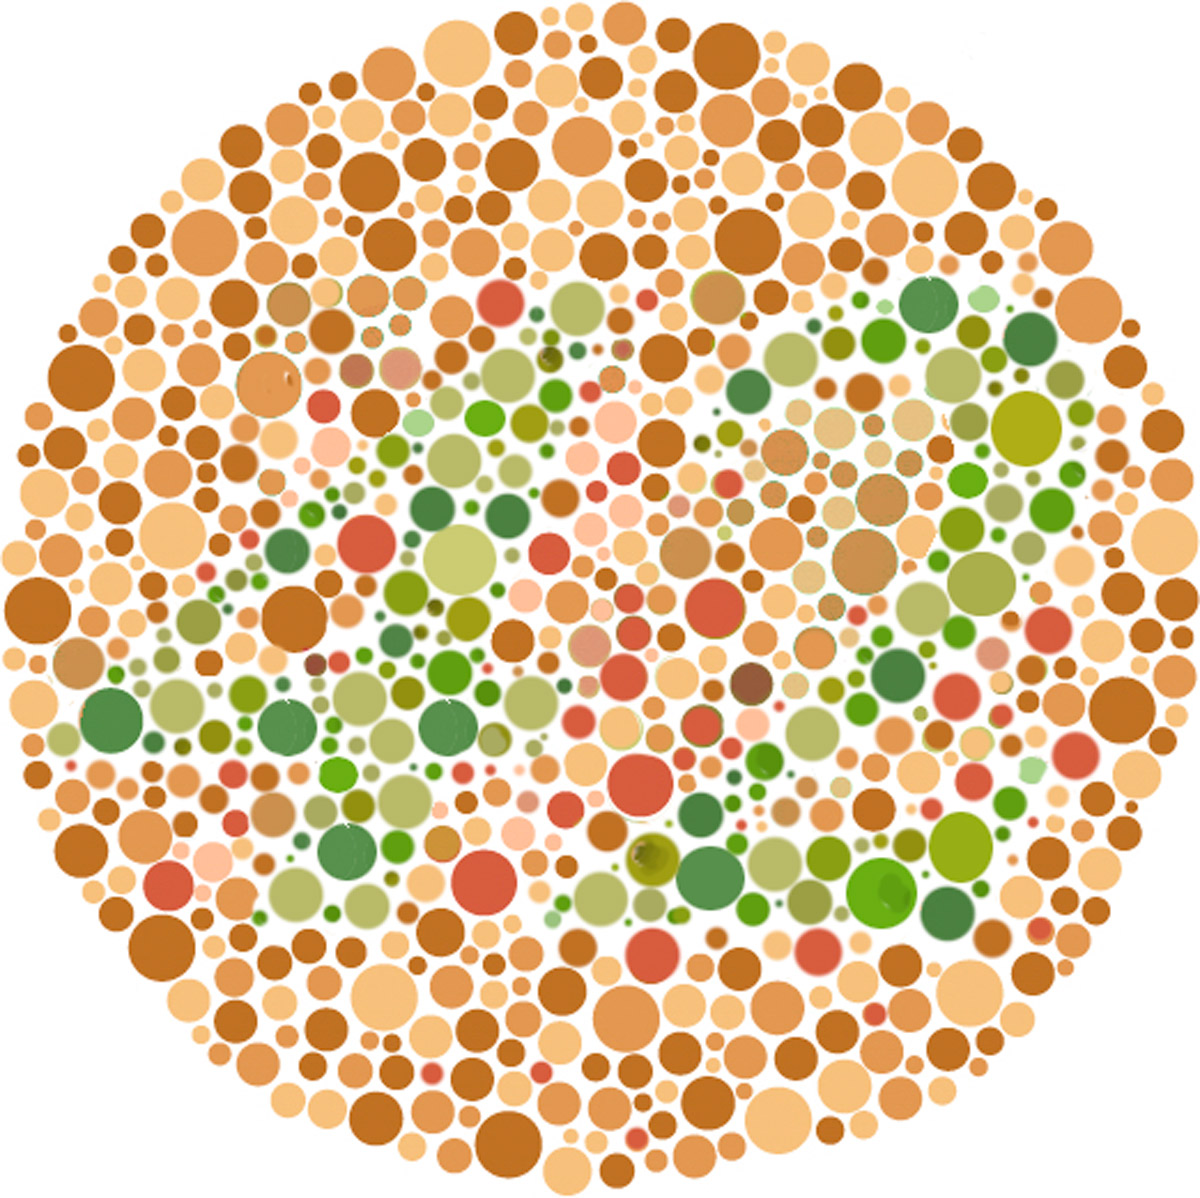 Are You Color Blind Take This Quiz To Find Out Heywise | Images and ...